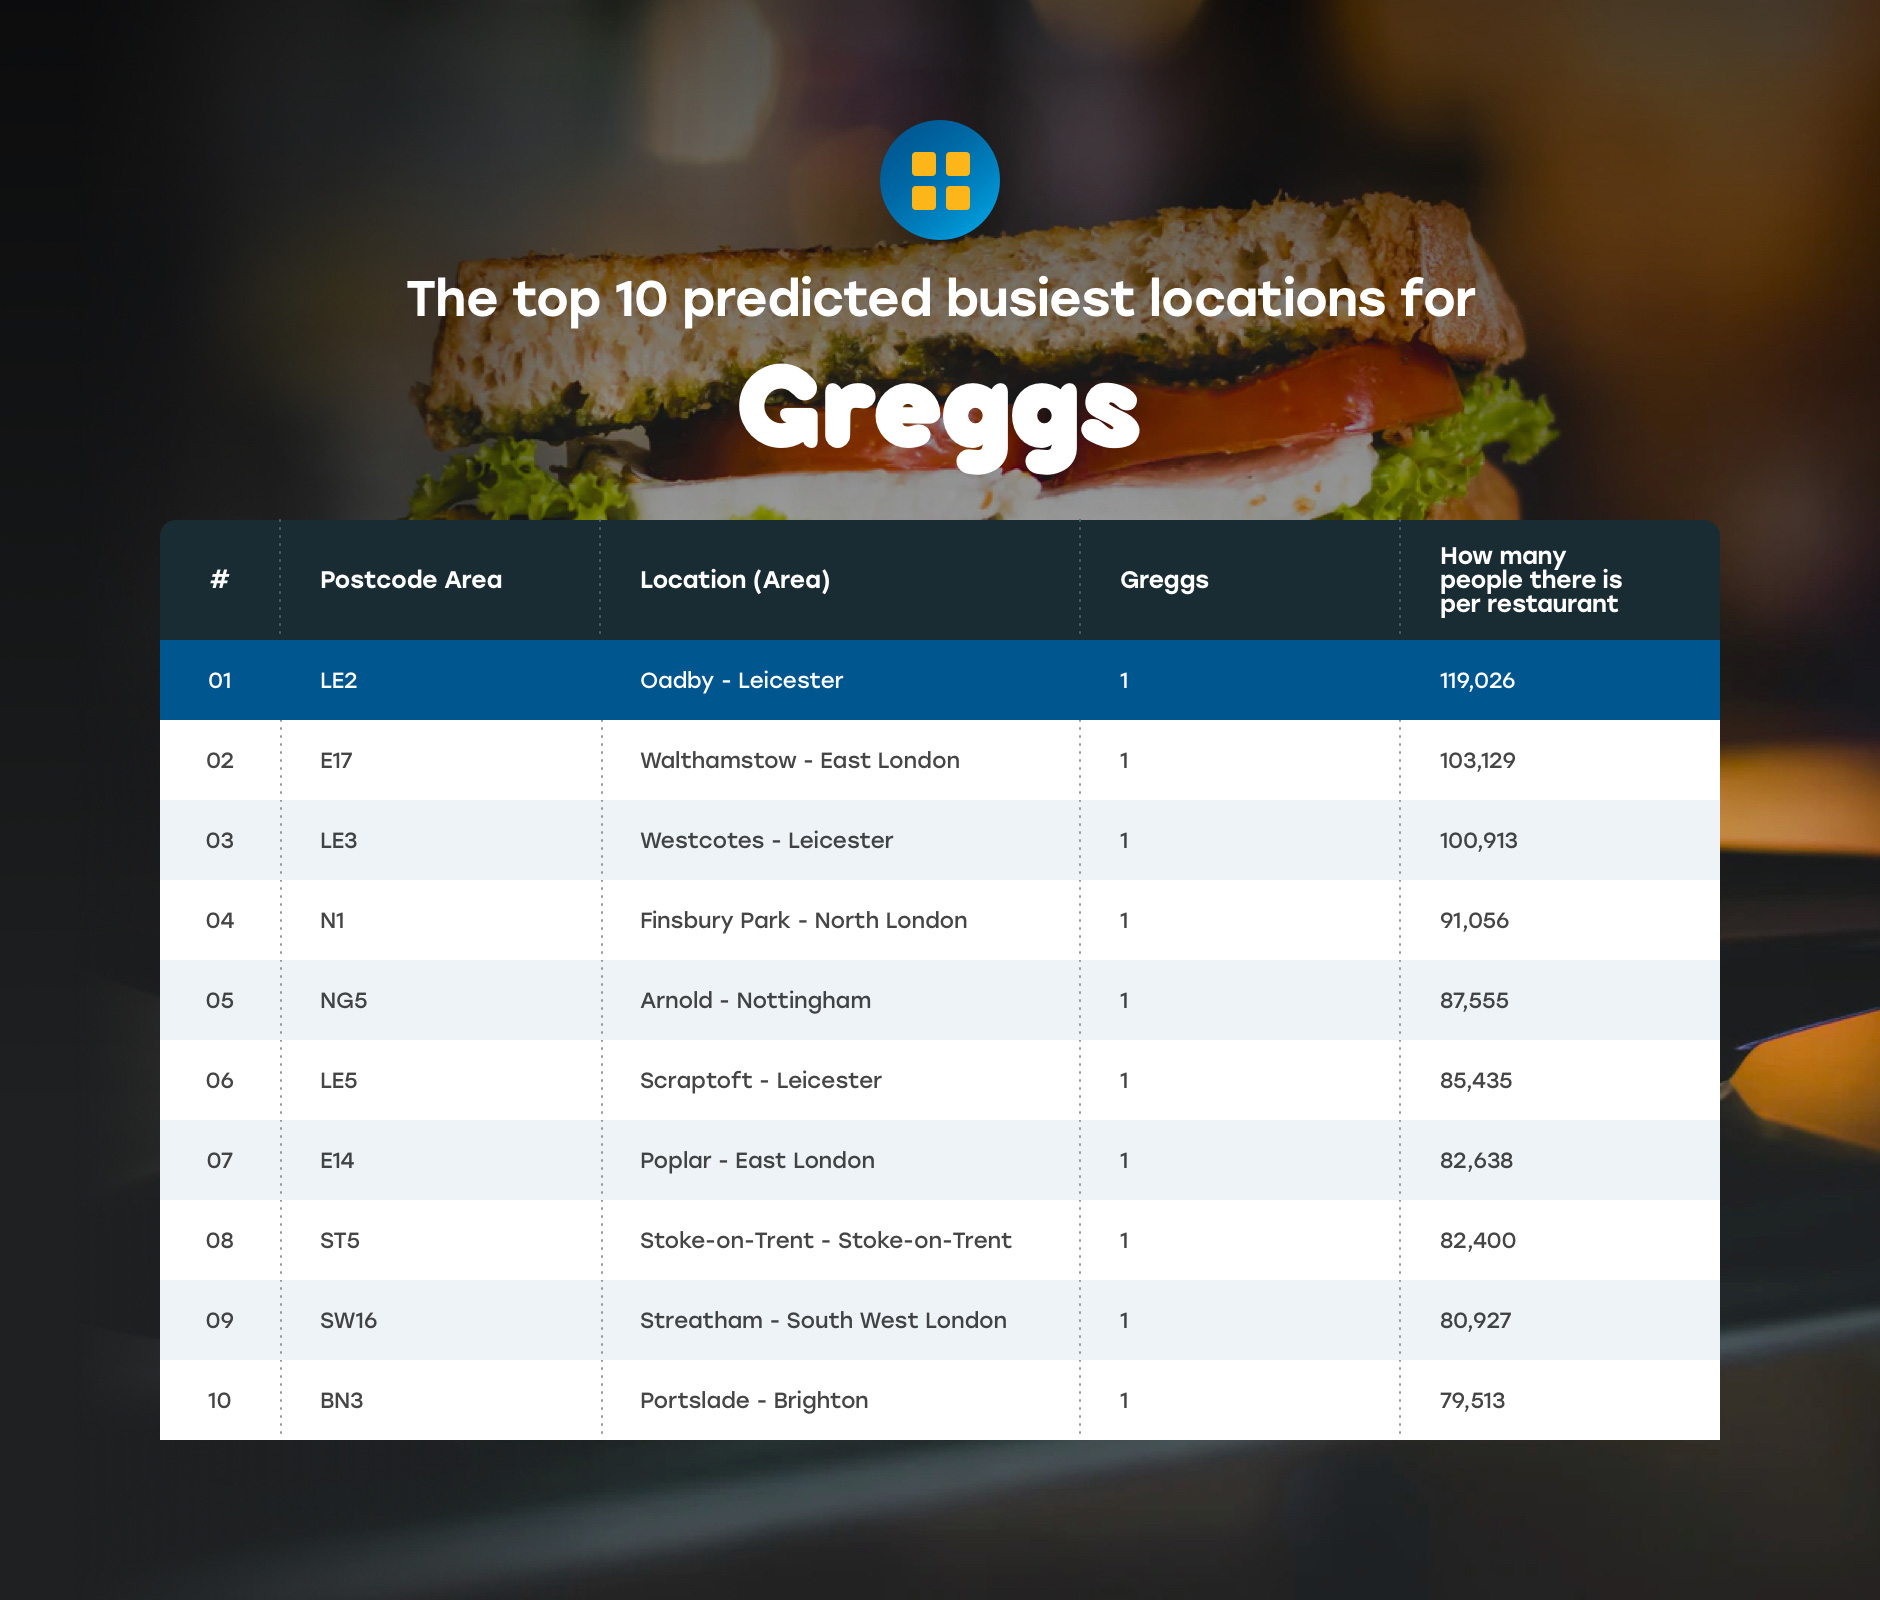 The top 10 predicted busiest locations for Greggs